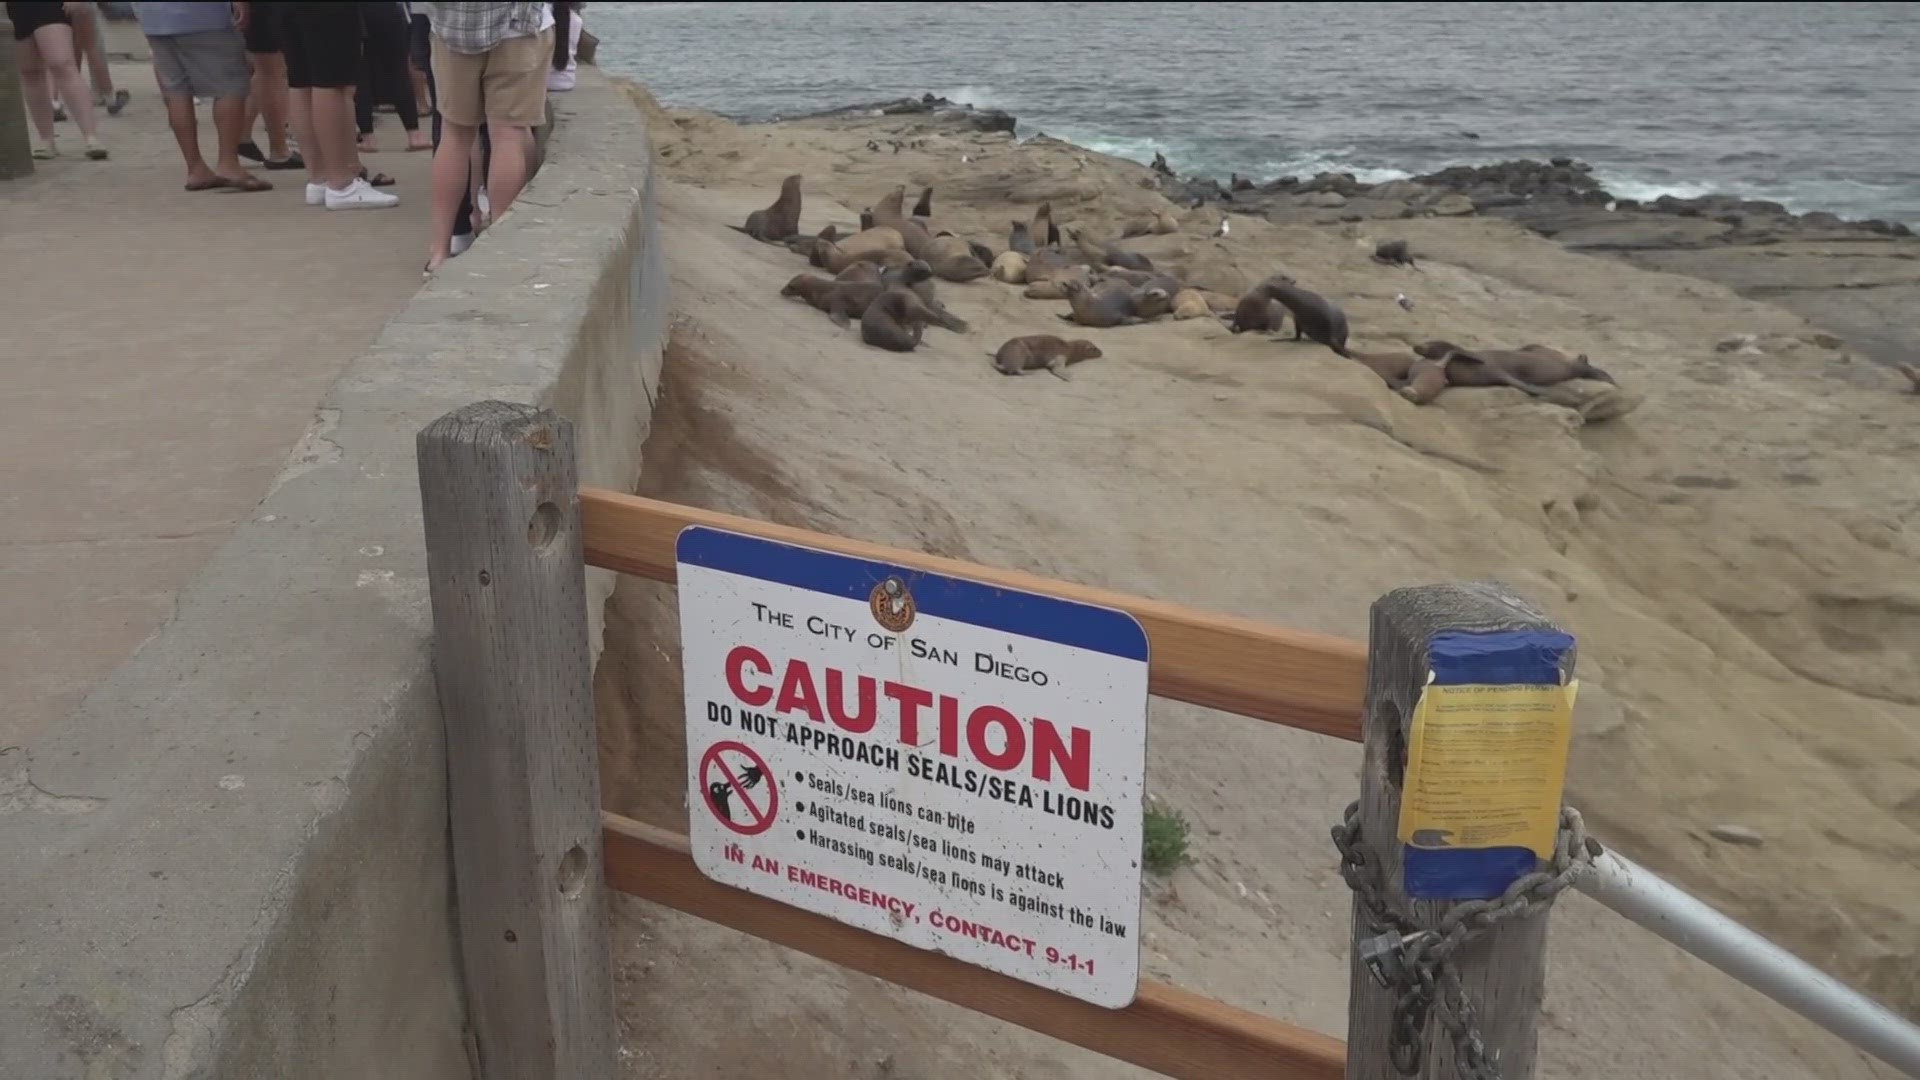 The conflict between humans and sea lions in La Jolla has been ongoing for many years, and now a City Council committee wants to close the area permanently.